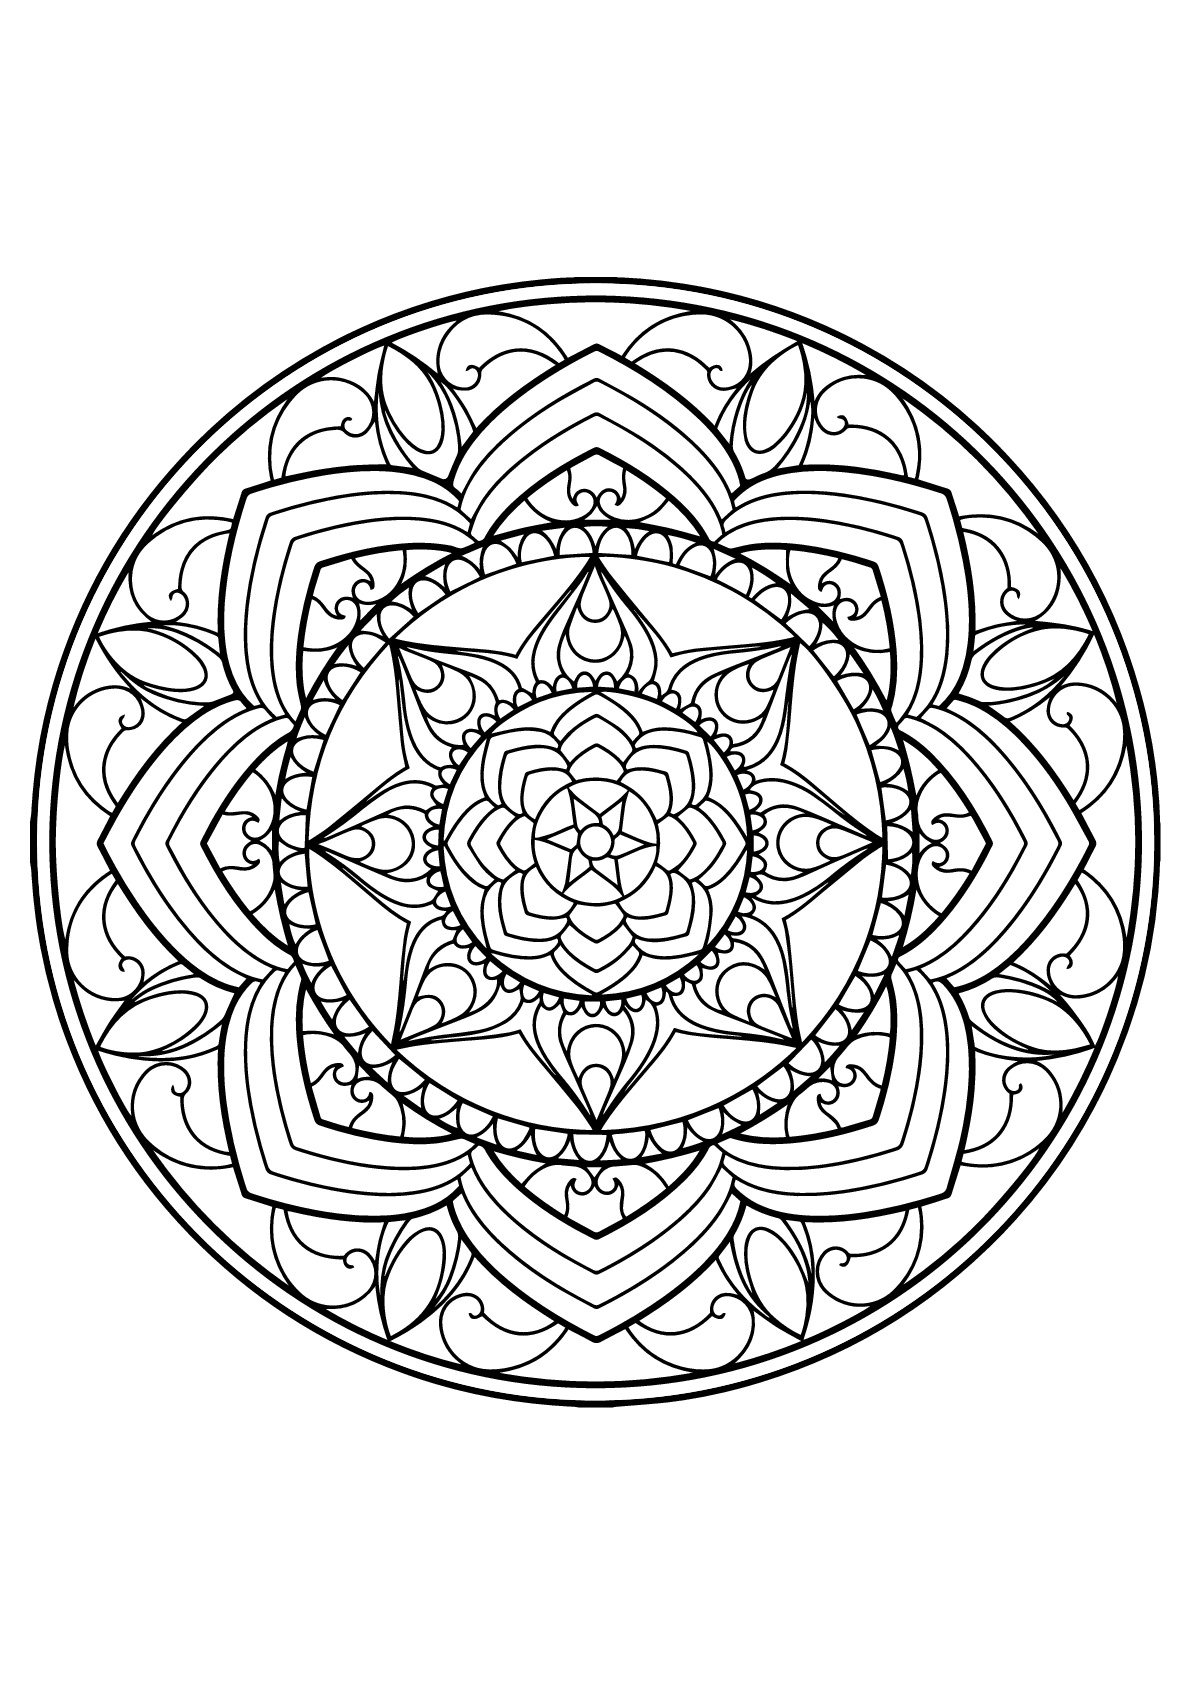 Mandala from free coloring books for adults 13 - M&alas Adult Coloring